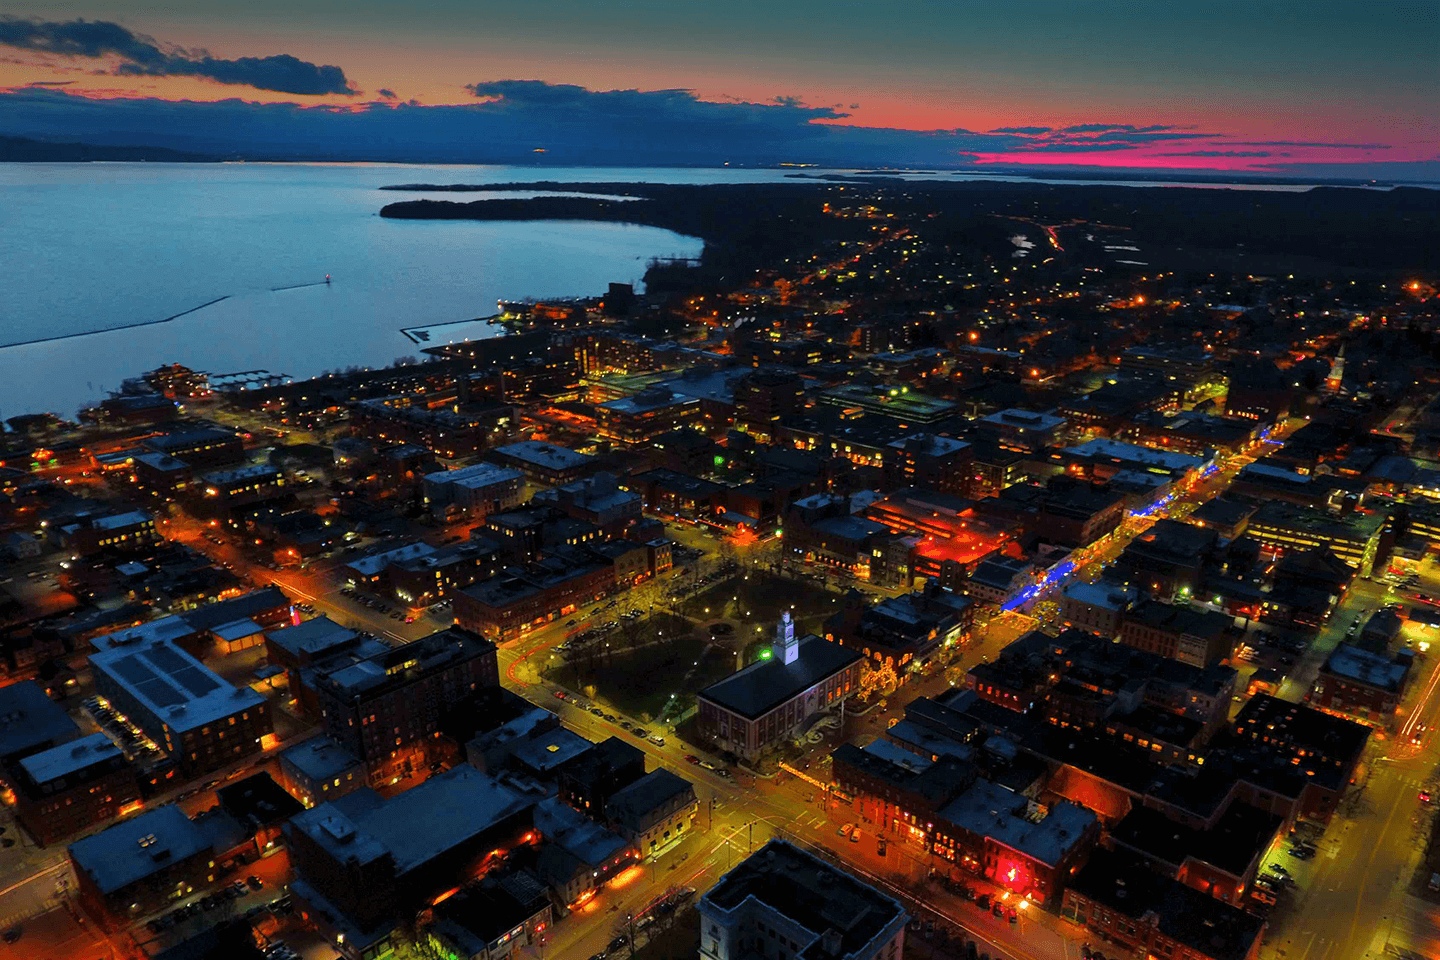 Aerial view of Burlington and the UVM Campus at sunset accented by colorful lights and the lake.